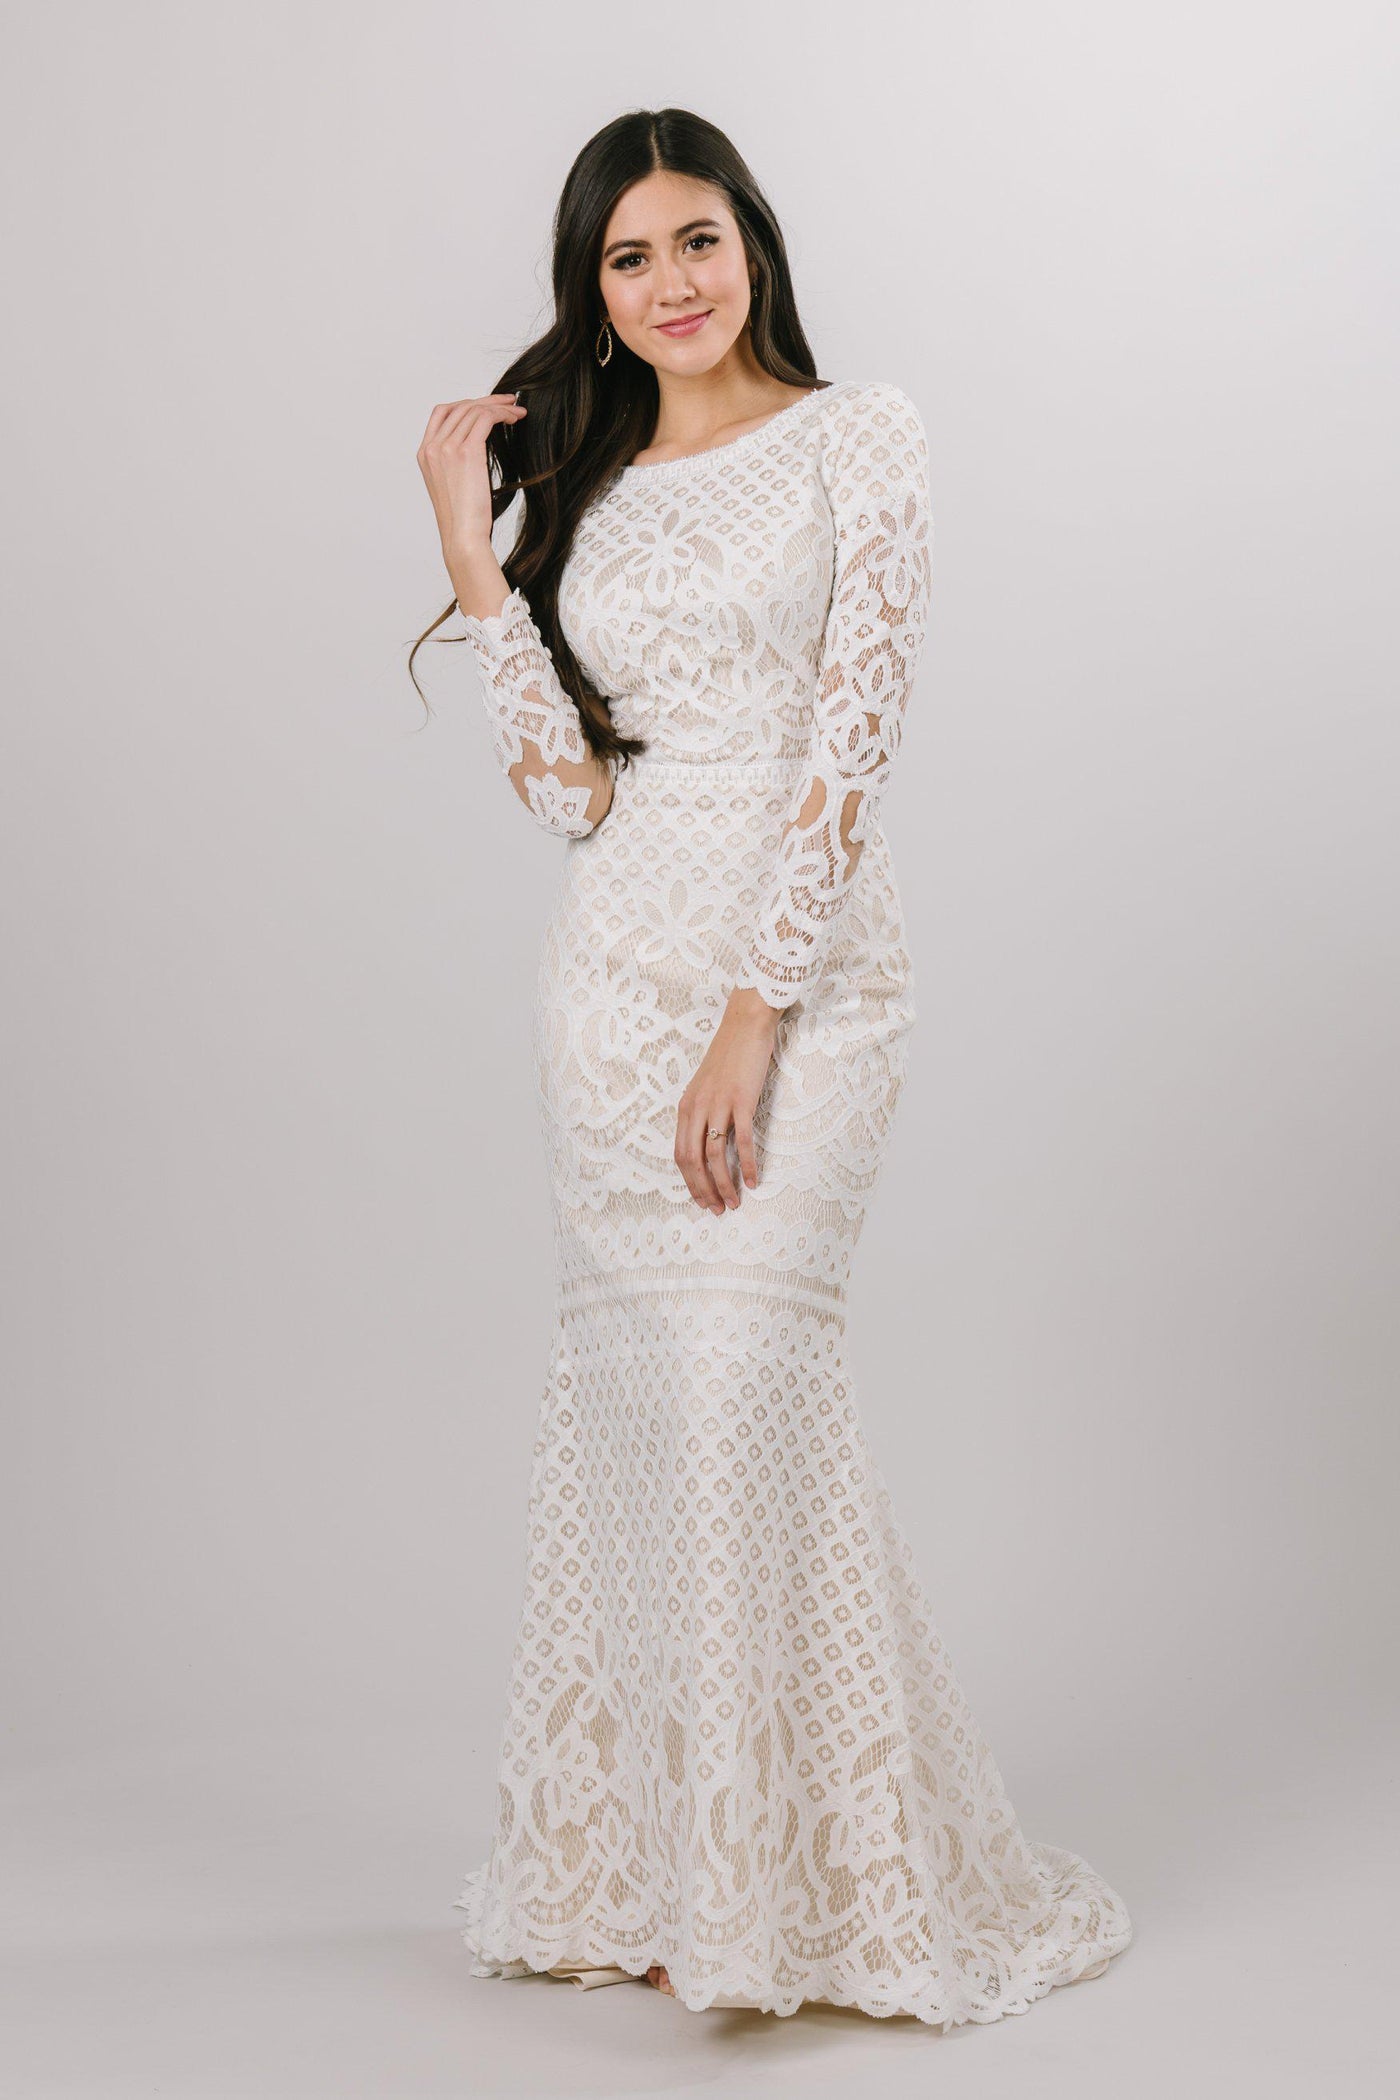 Lace wedding gown with long sleeves, style Lorna, is part of the Wedding Collection of LatterDayBride, a Salt Lake City bridal shop.